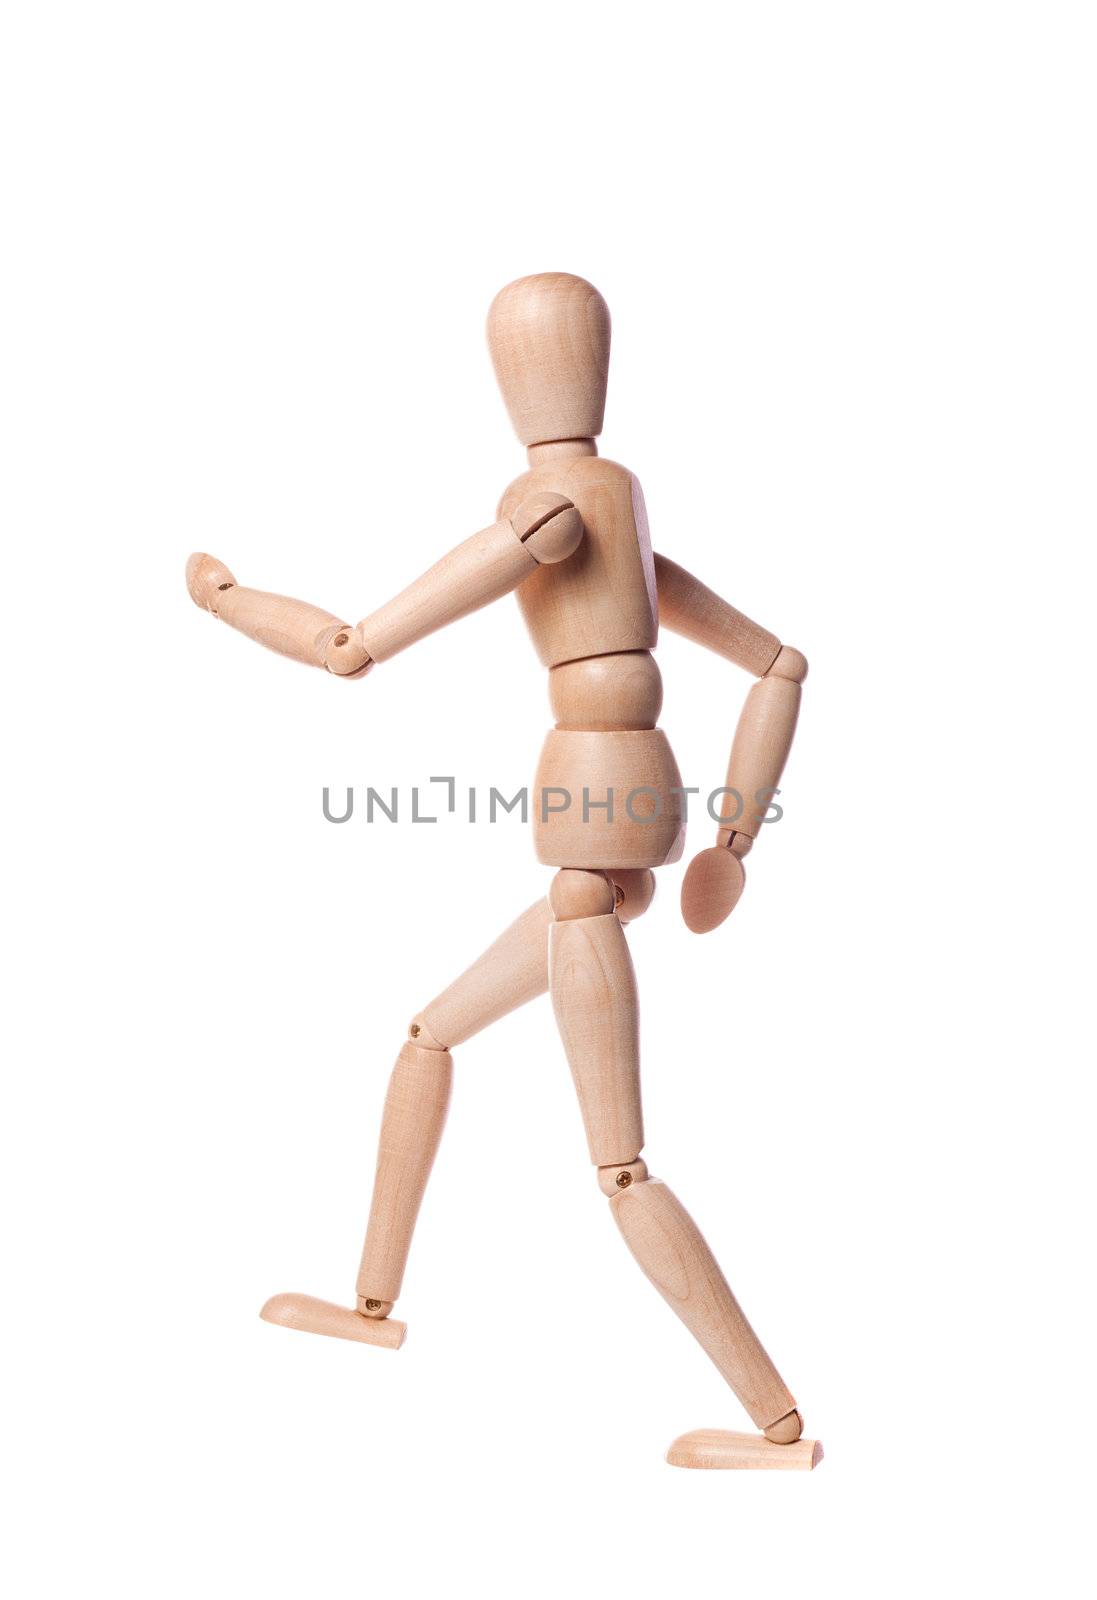 Wooden puppet in a jogging position